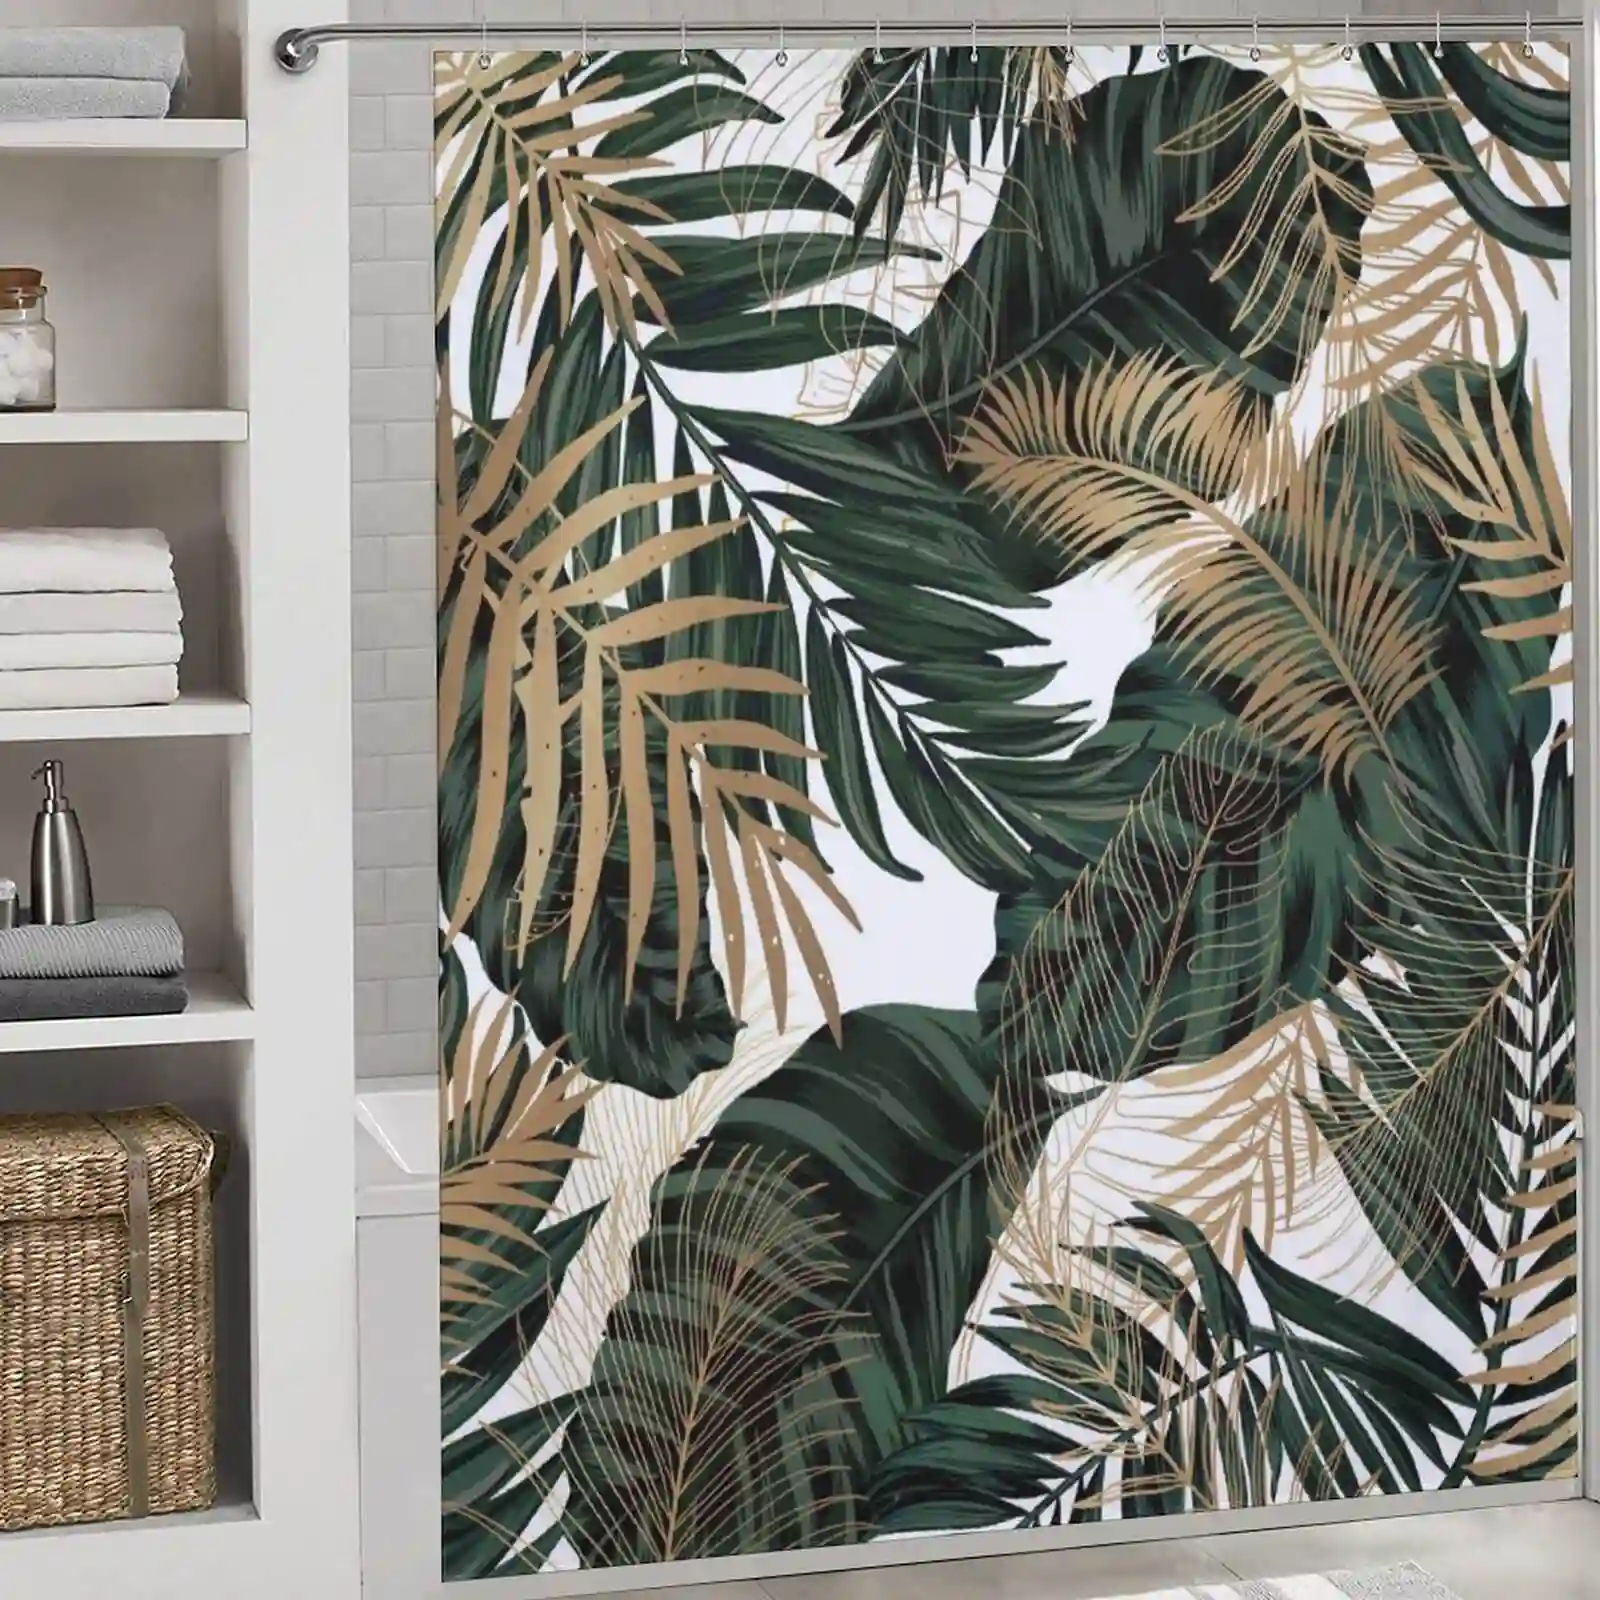 Sage green bathroom decor ideas: A shower curtain with a pattern of leaves.